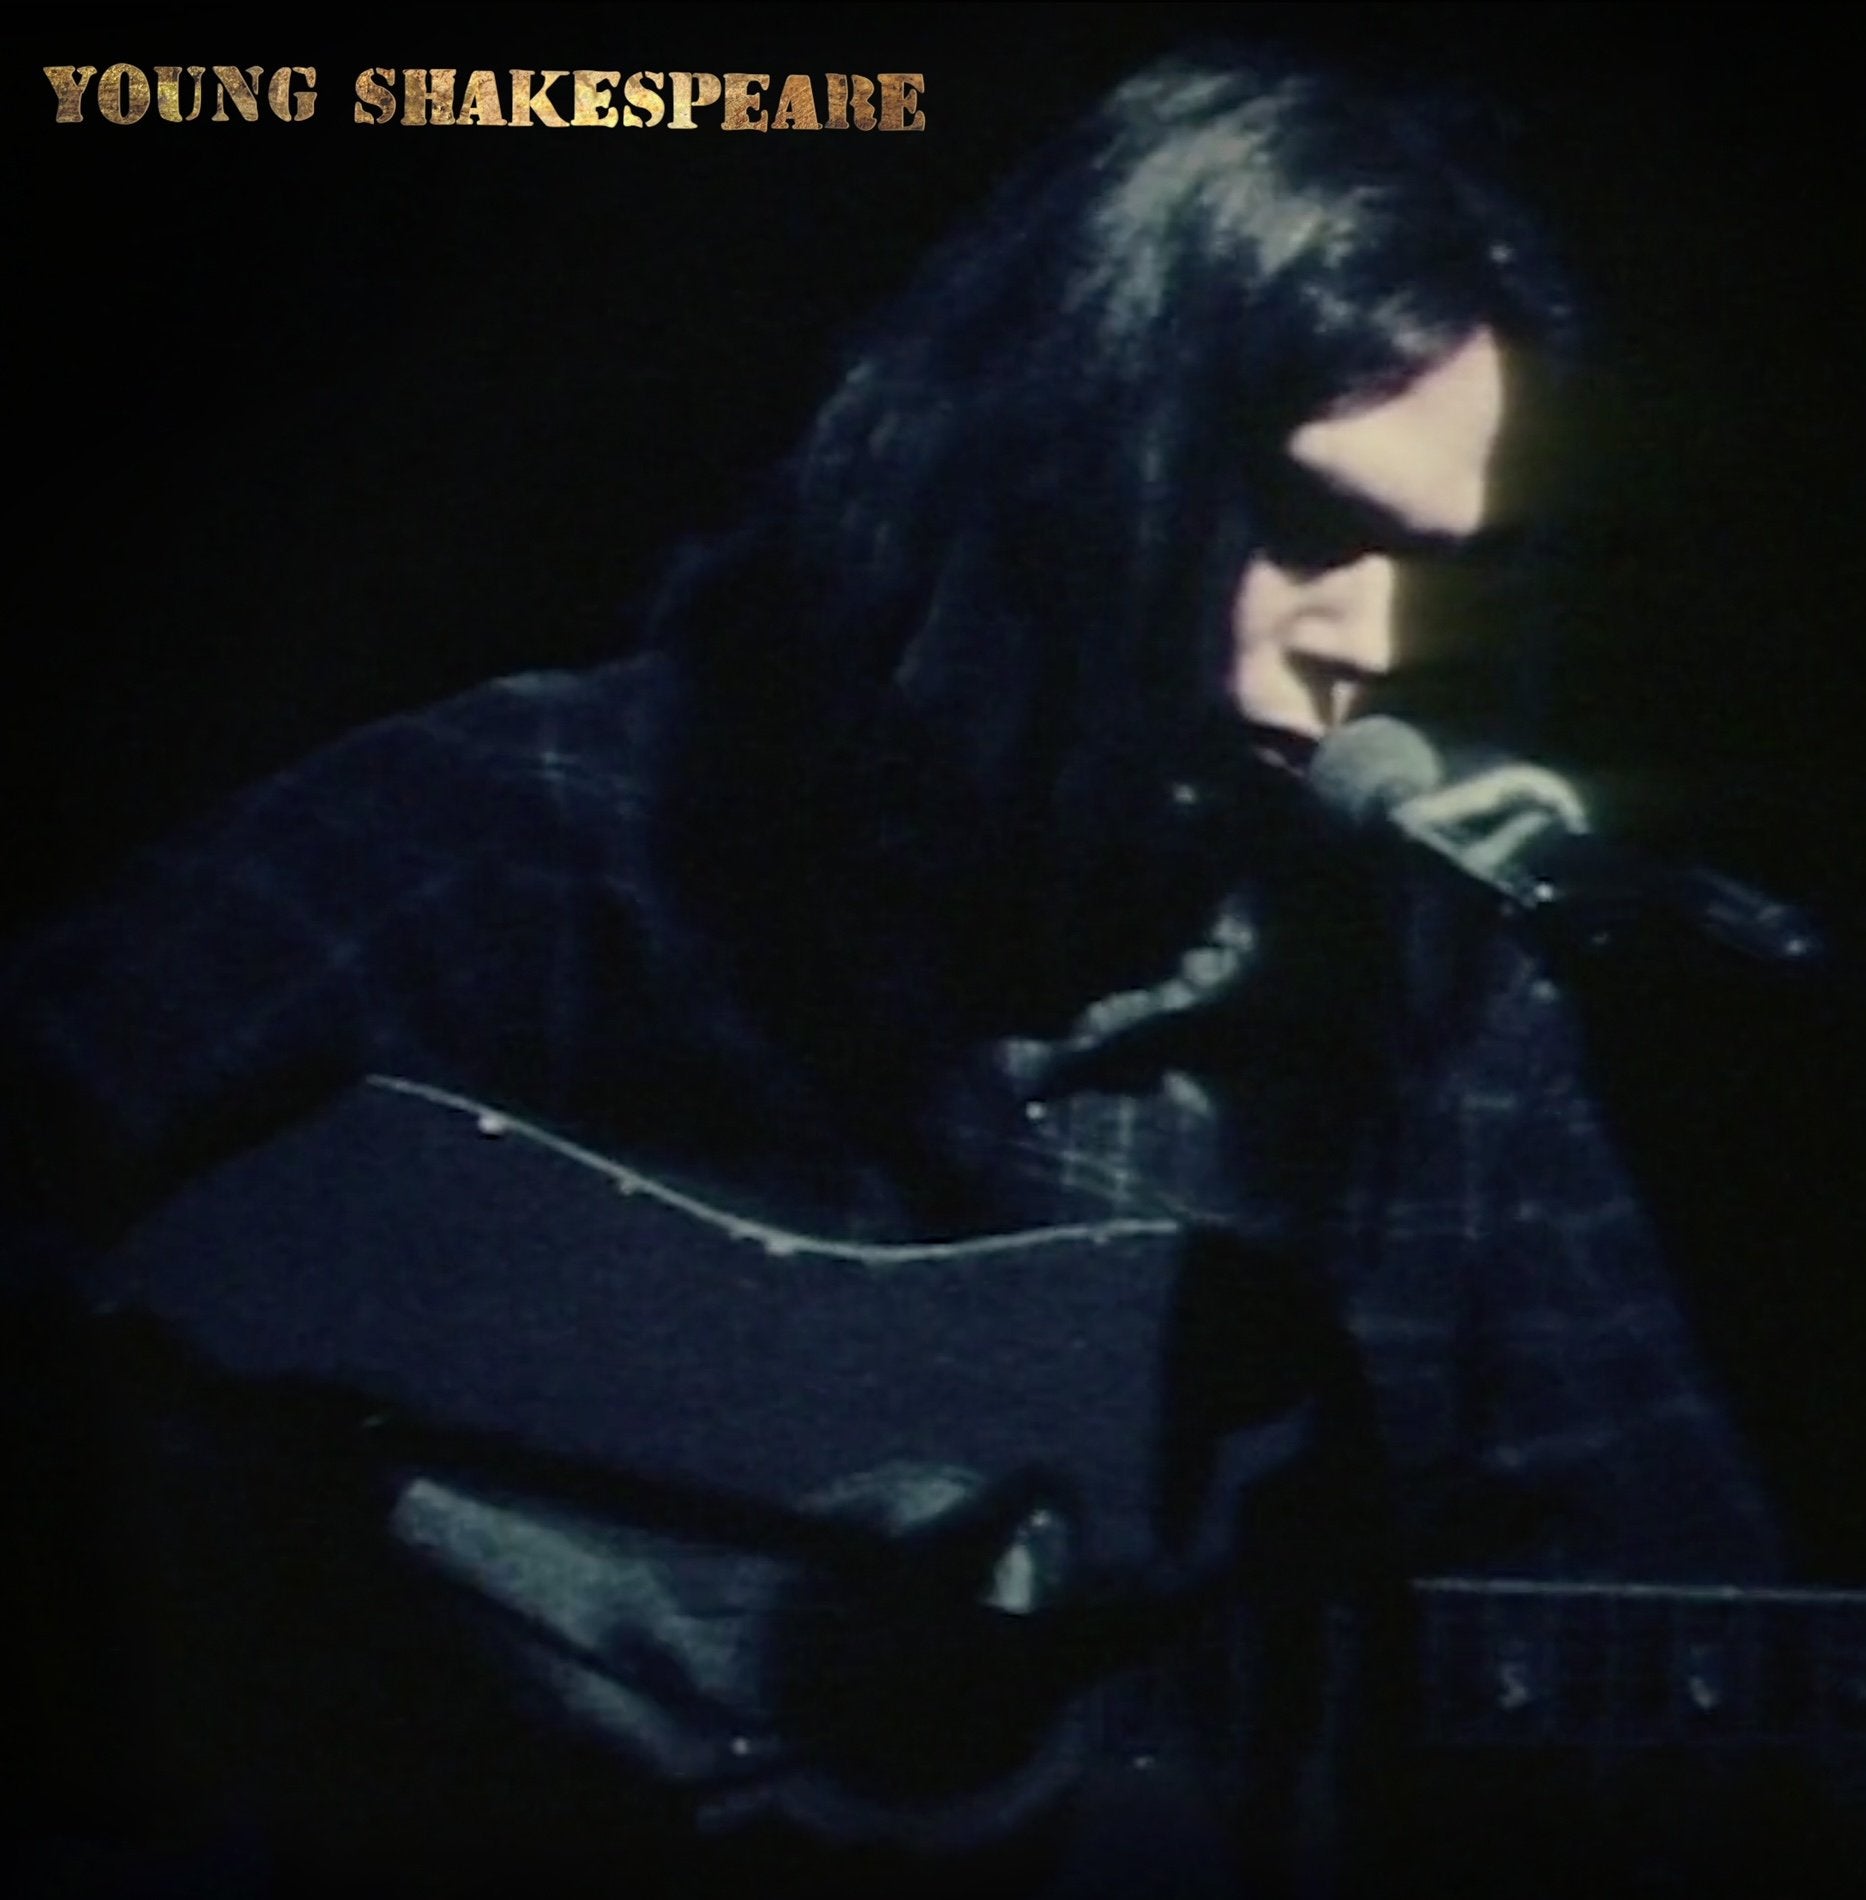 Neil Young - Young Shakespeare (Warner Records)